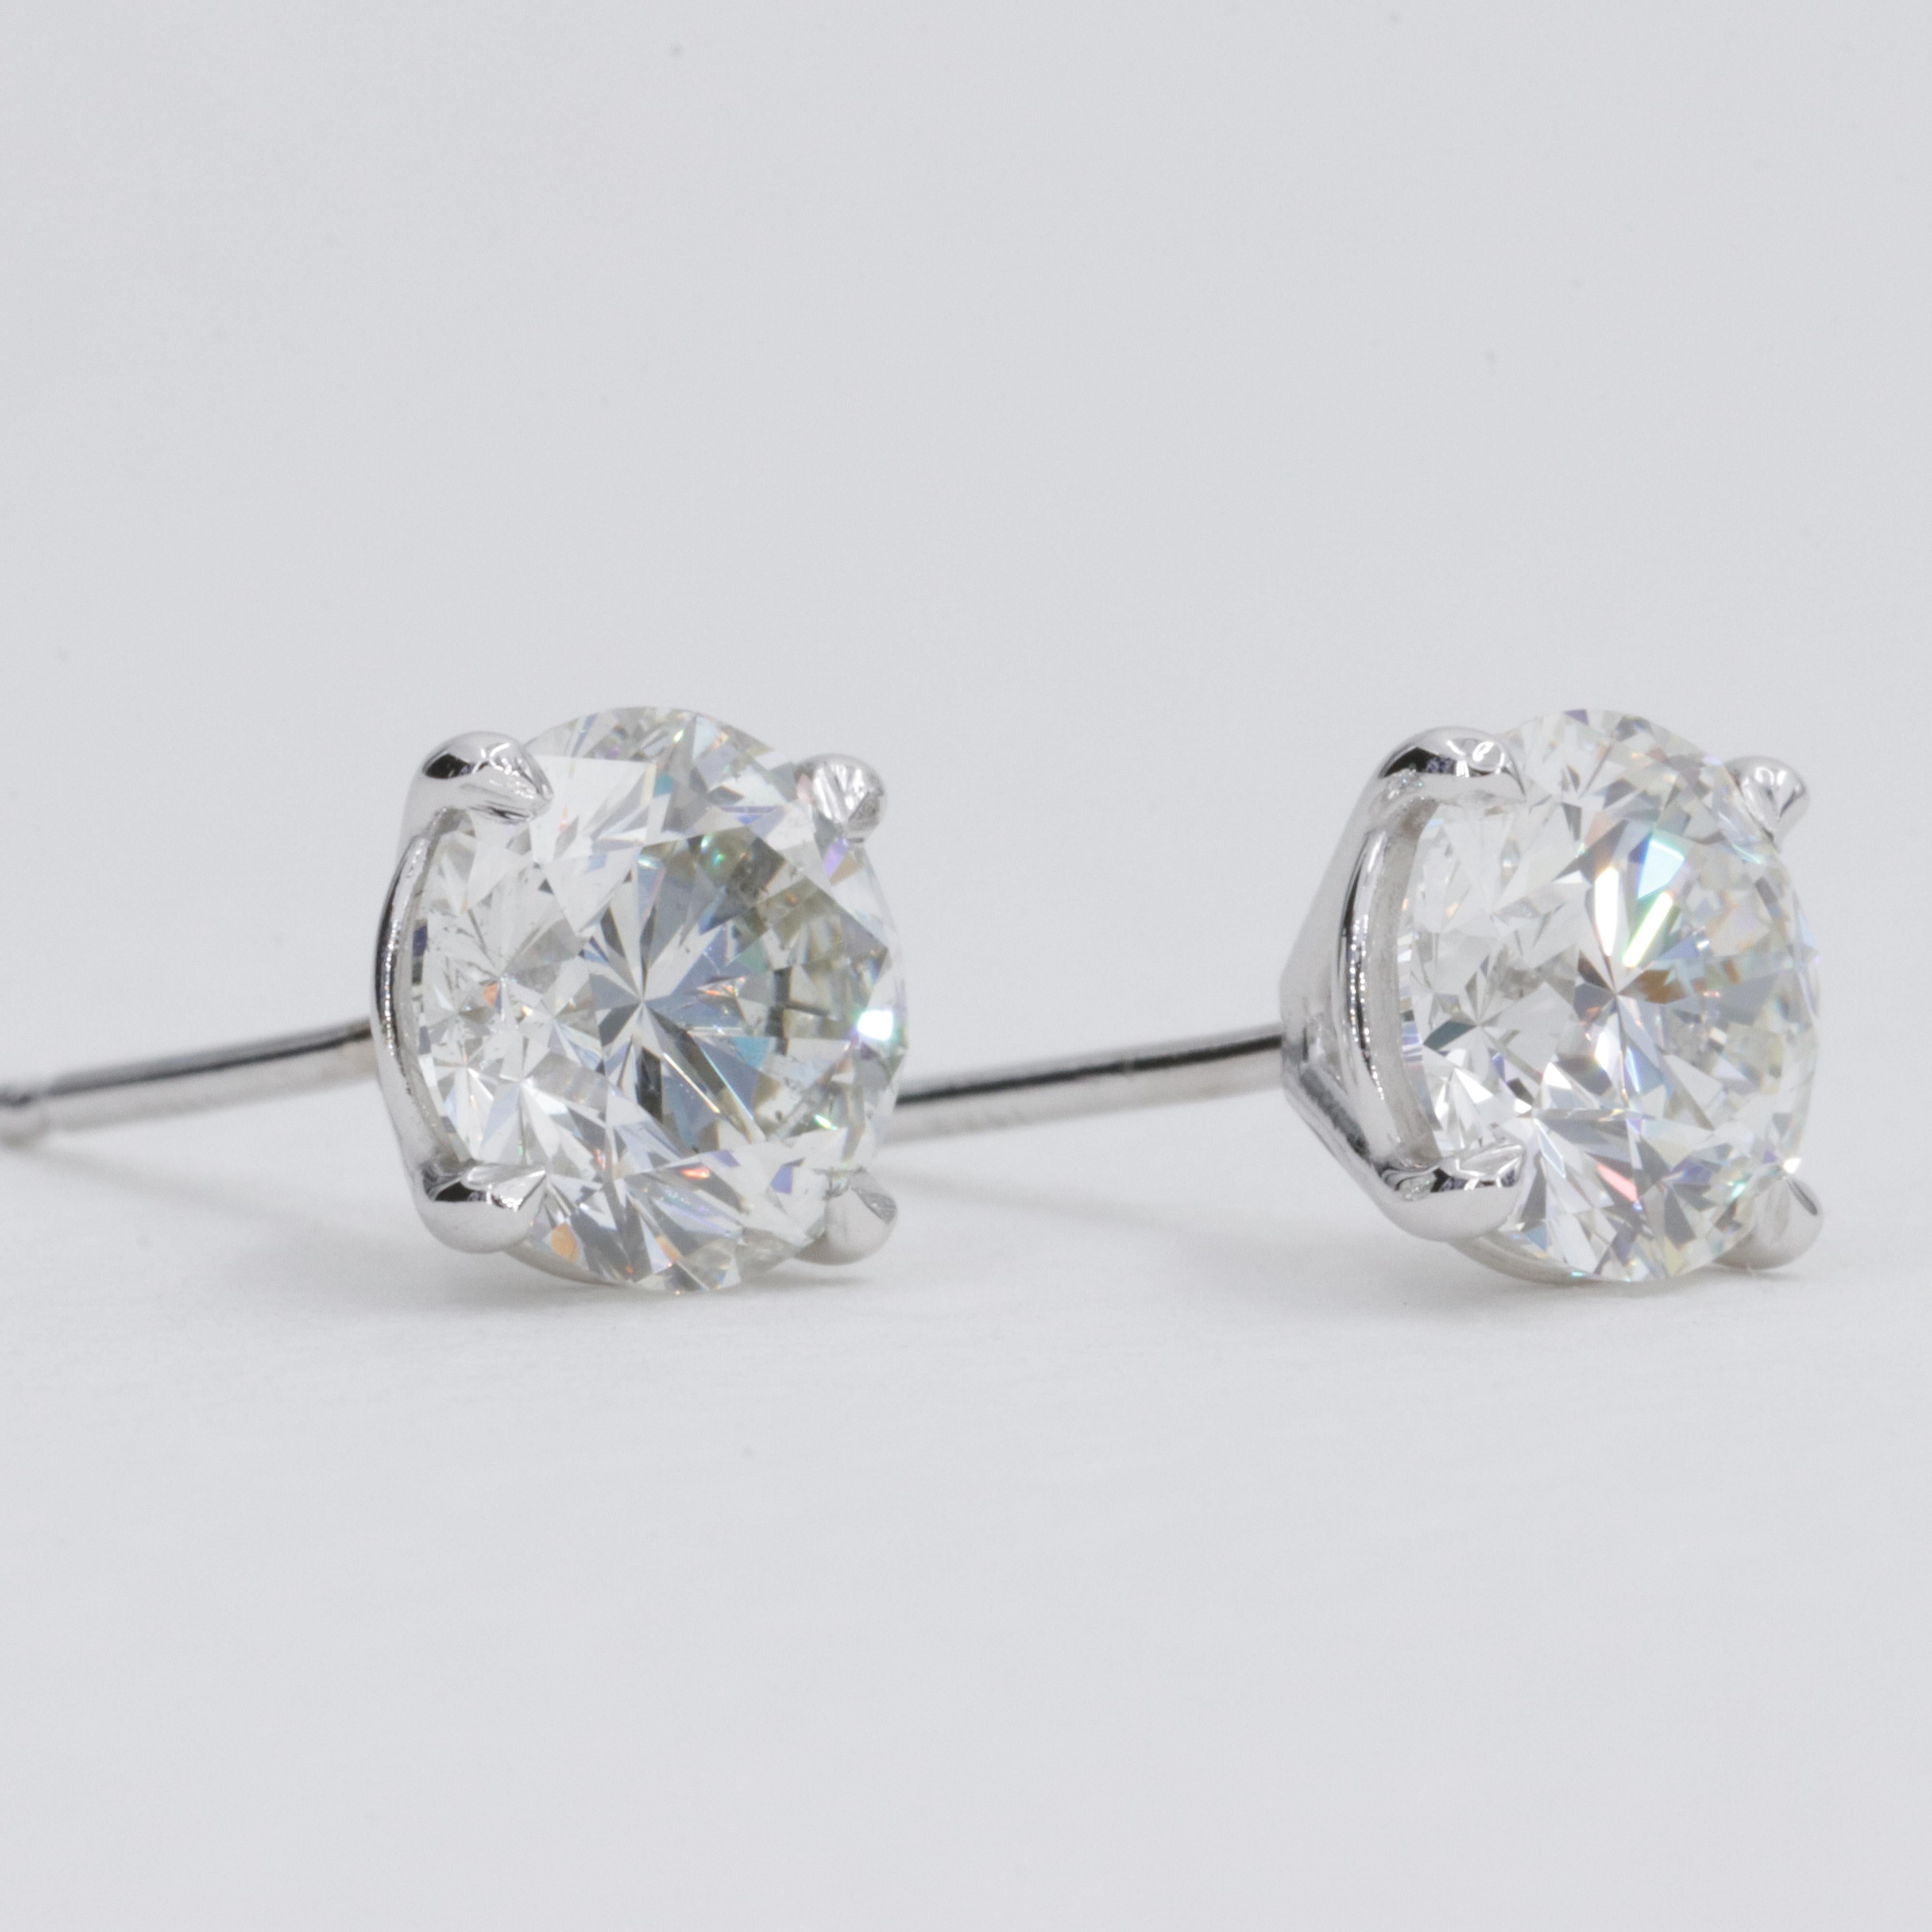 Modern 2.06 Carat GIA Natural Diamond Stud Earrings in White Gold 4 Prong Settings For Sale